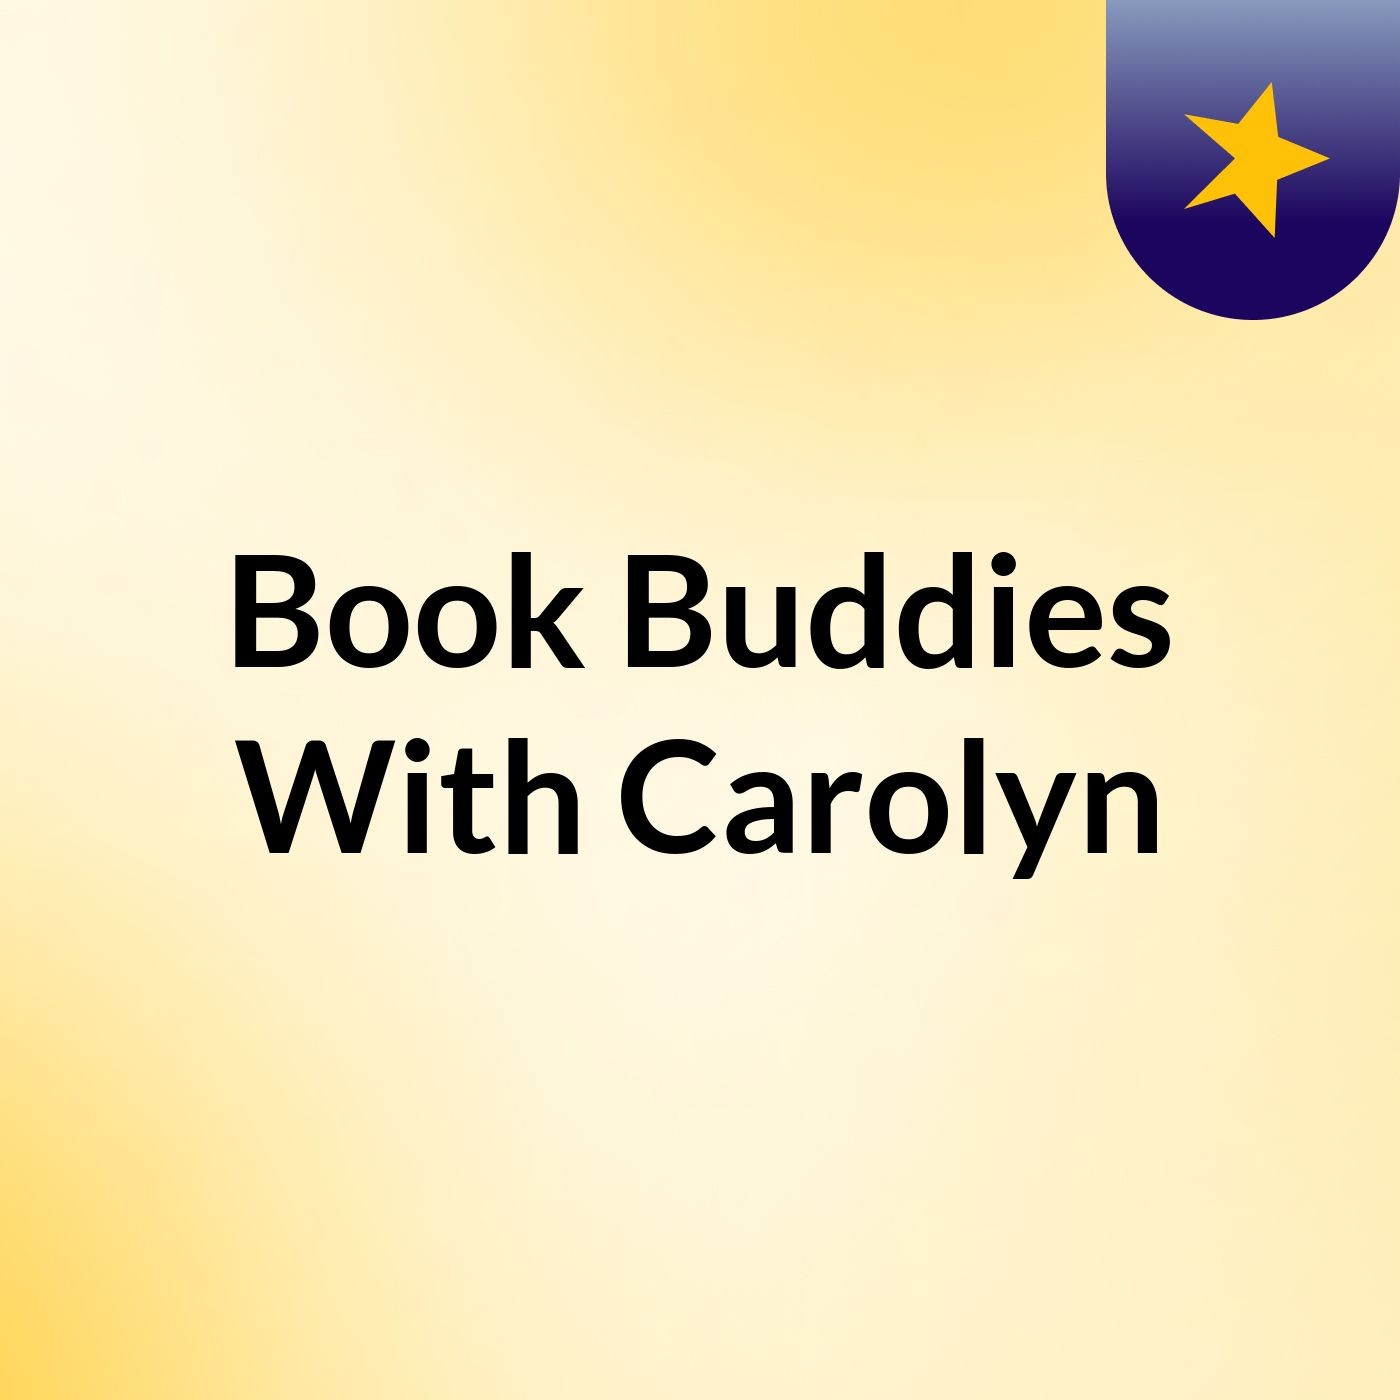 Episode 4 - Book Buddies With Carolyn